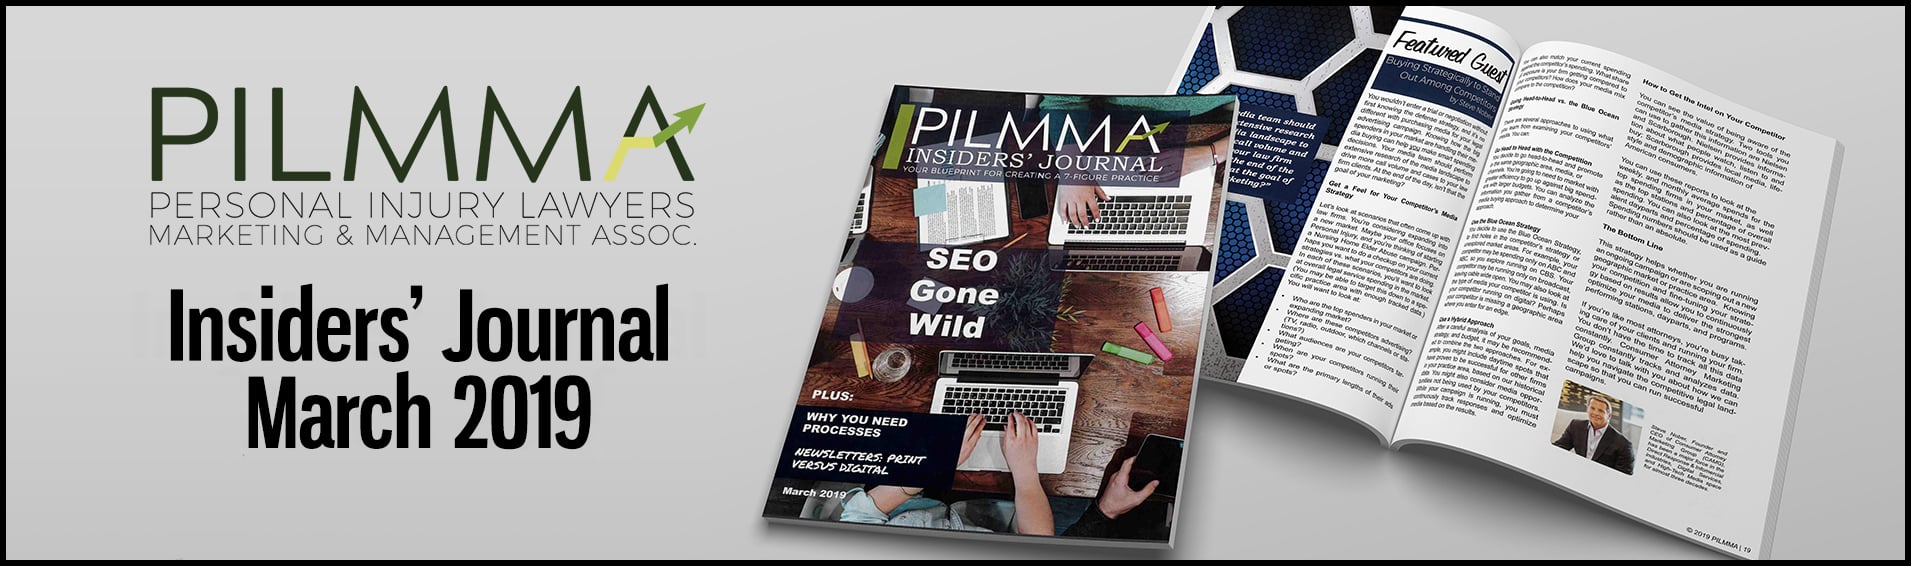 Graphic showing the PILMMA Insiders' Journal March 2019